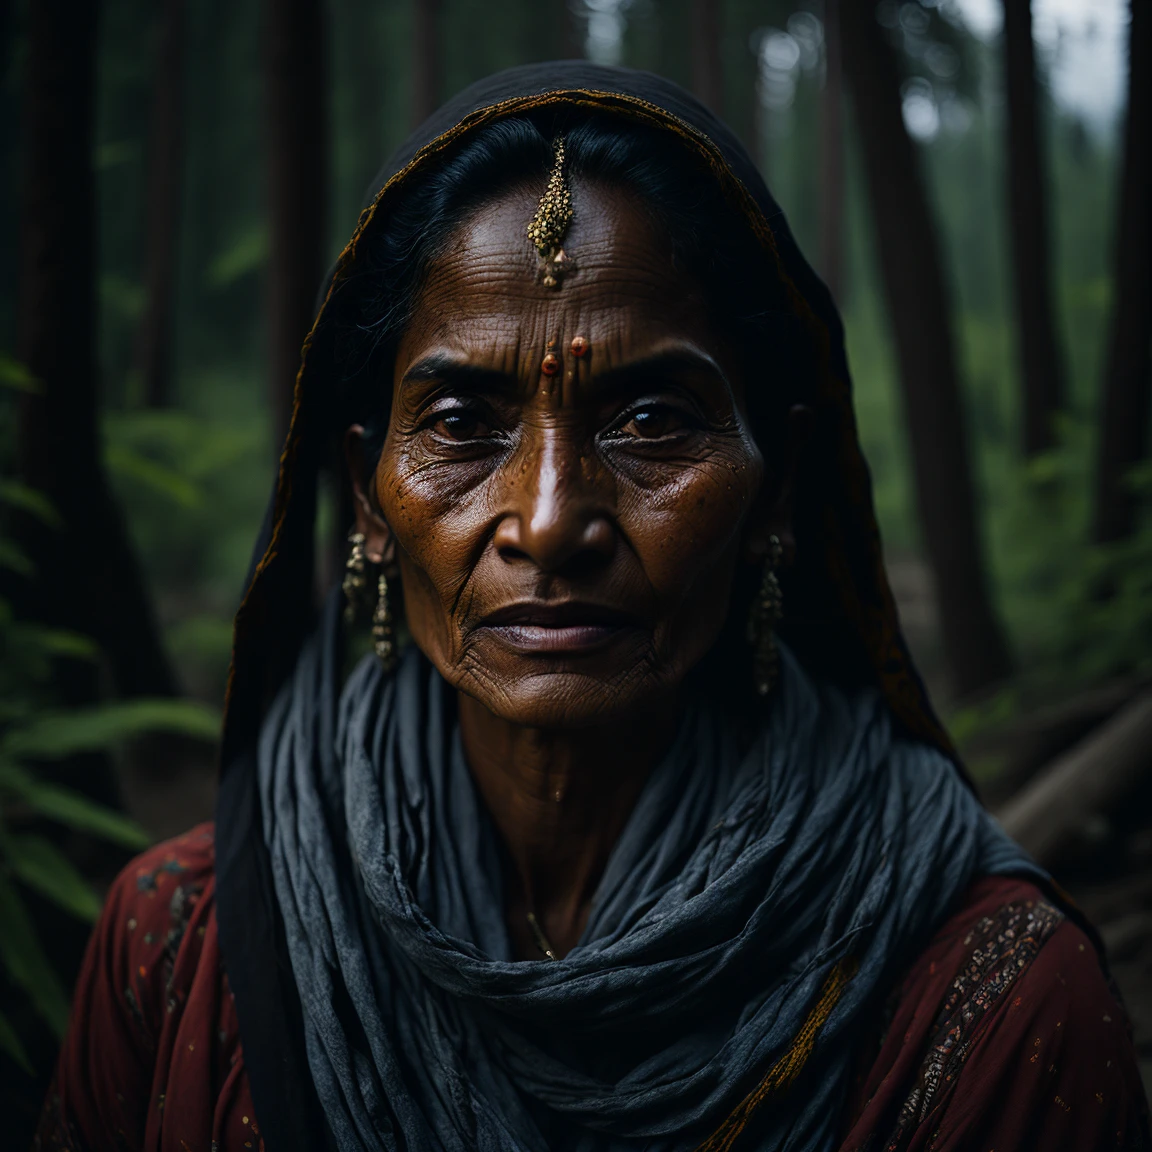 portrait oF an indian village woman in Forest in Himachal pradesh, clear Facial Features, filmisch, 35mm lens, F/1.8, Akzentbeleuchtung, Globale Beleuchtung